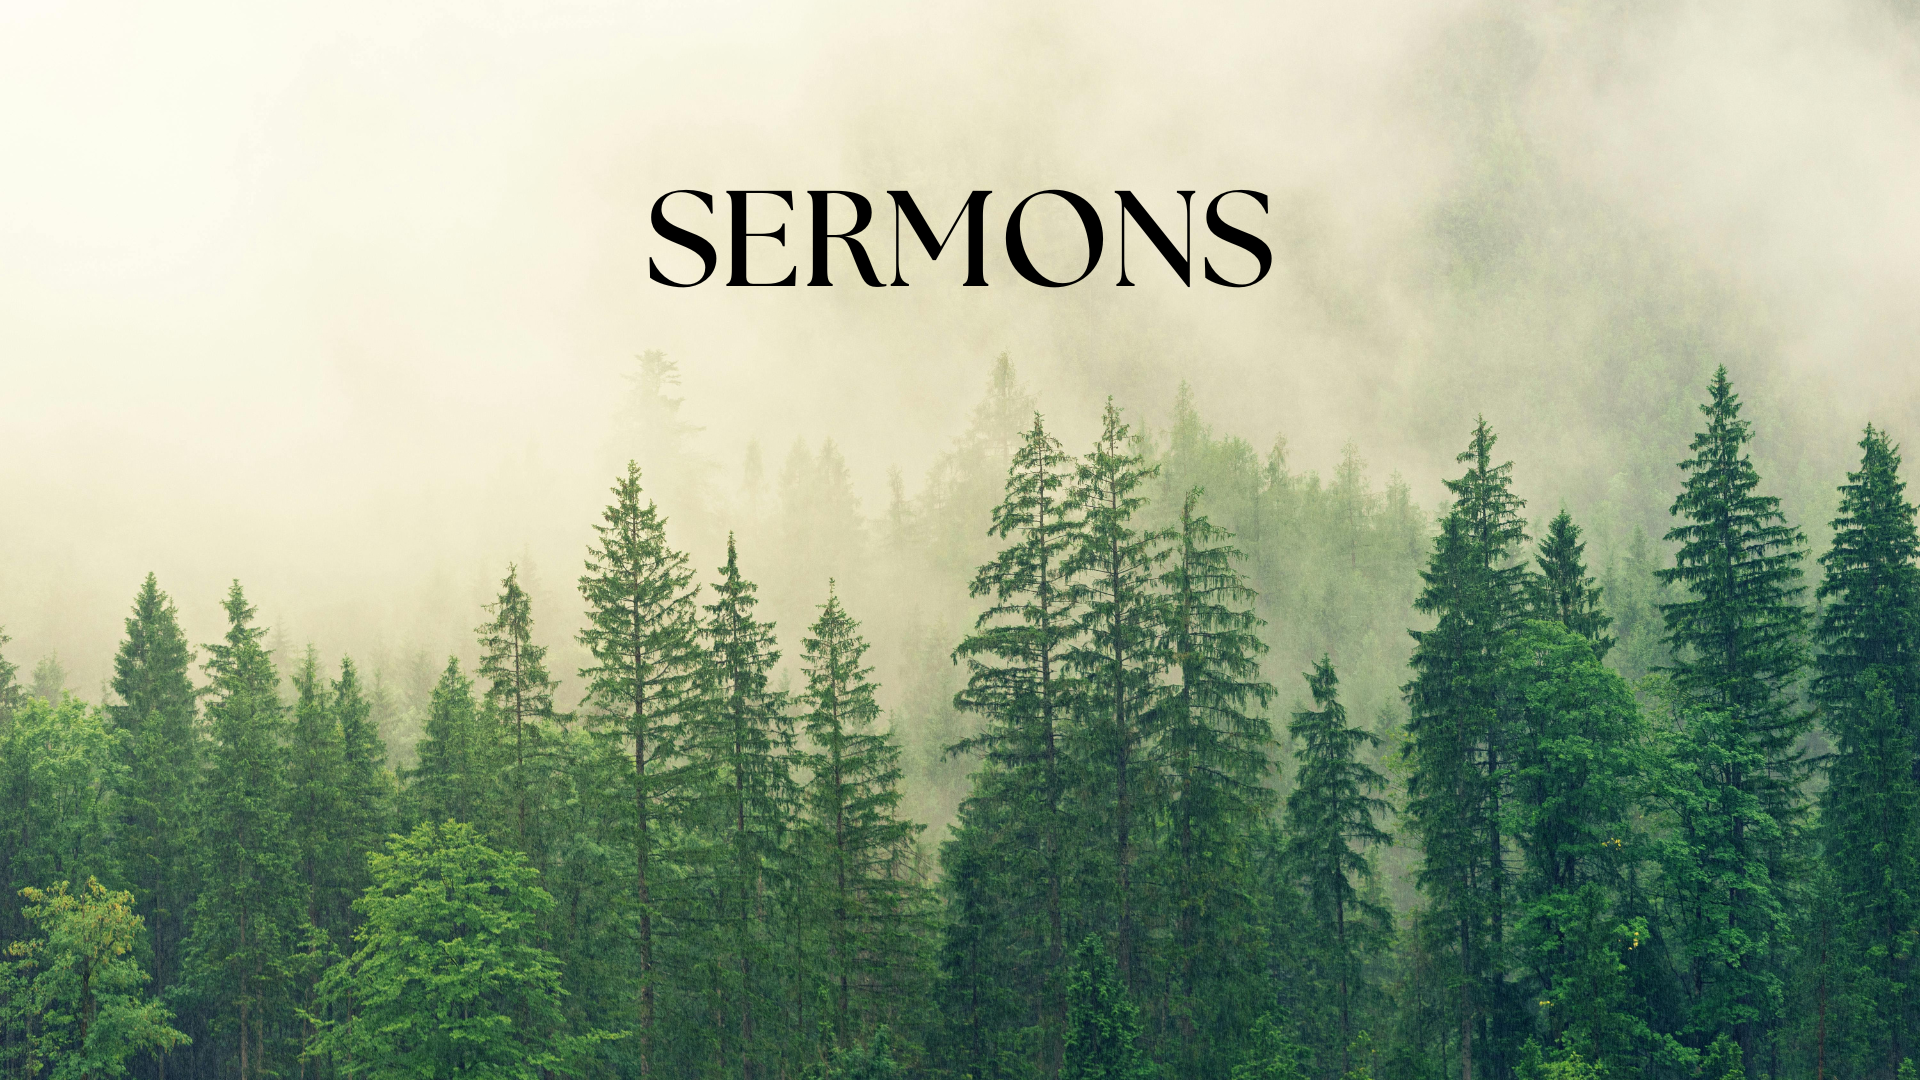 Background scene of a forest of hazy evergreens to the title of the page "sermons".